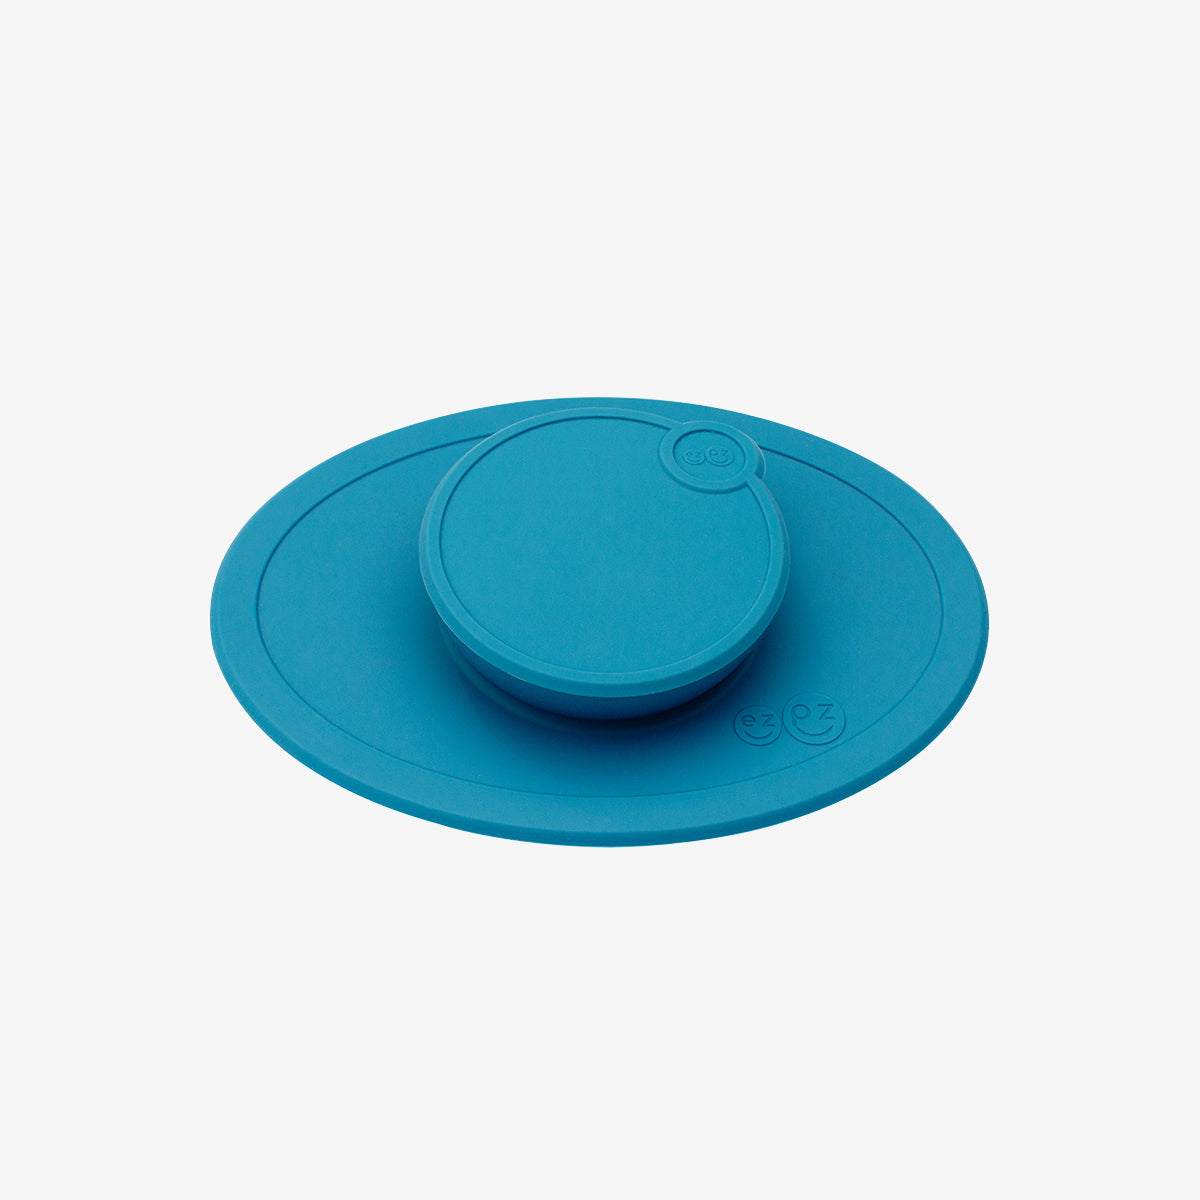 Tiny Bowl Lid in Blue / Storage Lids for the Tiny Bowl by ezpz / Silicone Lid for Baby Bowl